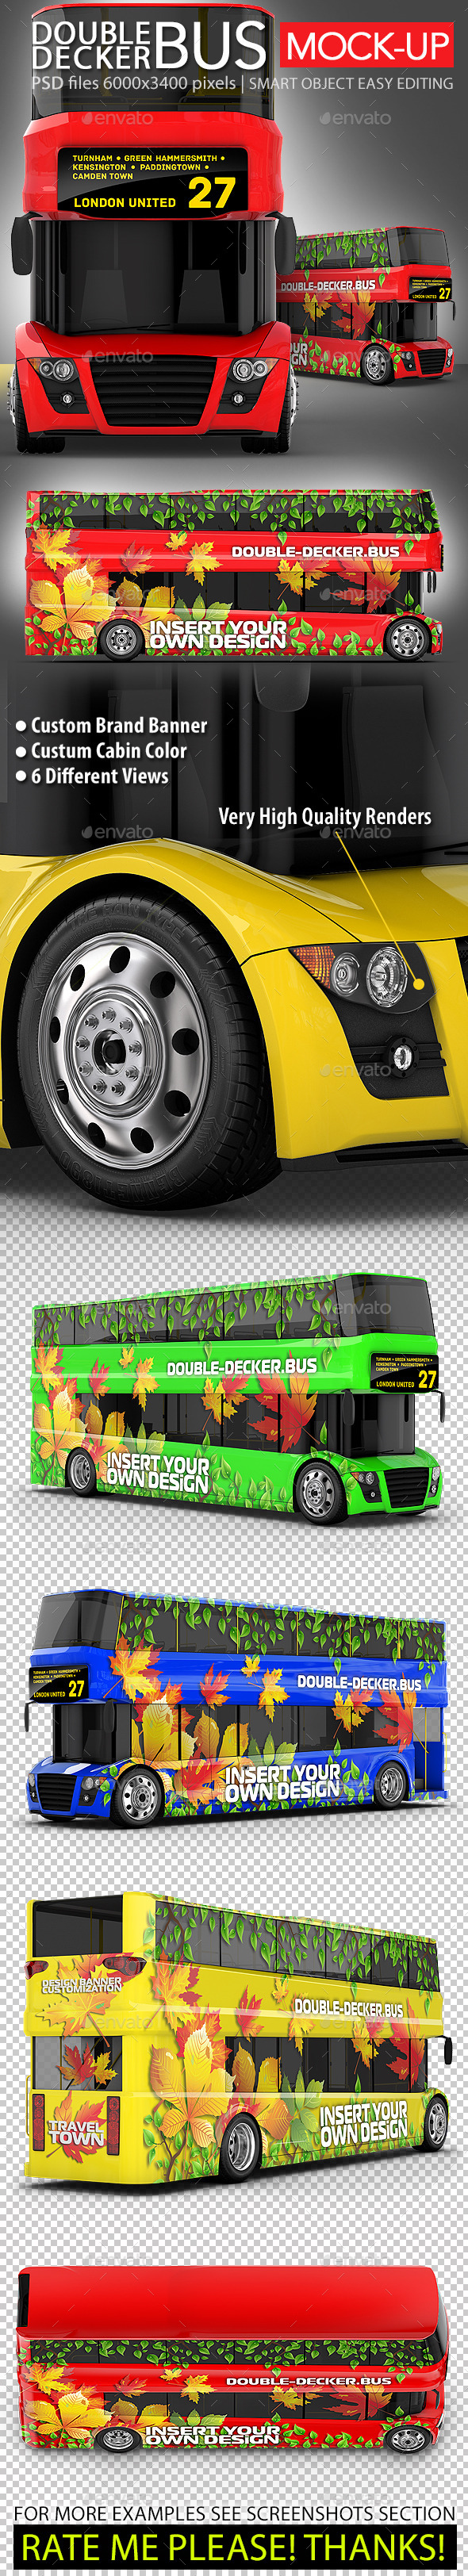 Red Double-Decker Bus Mock-up